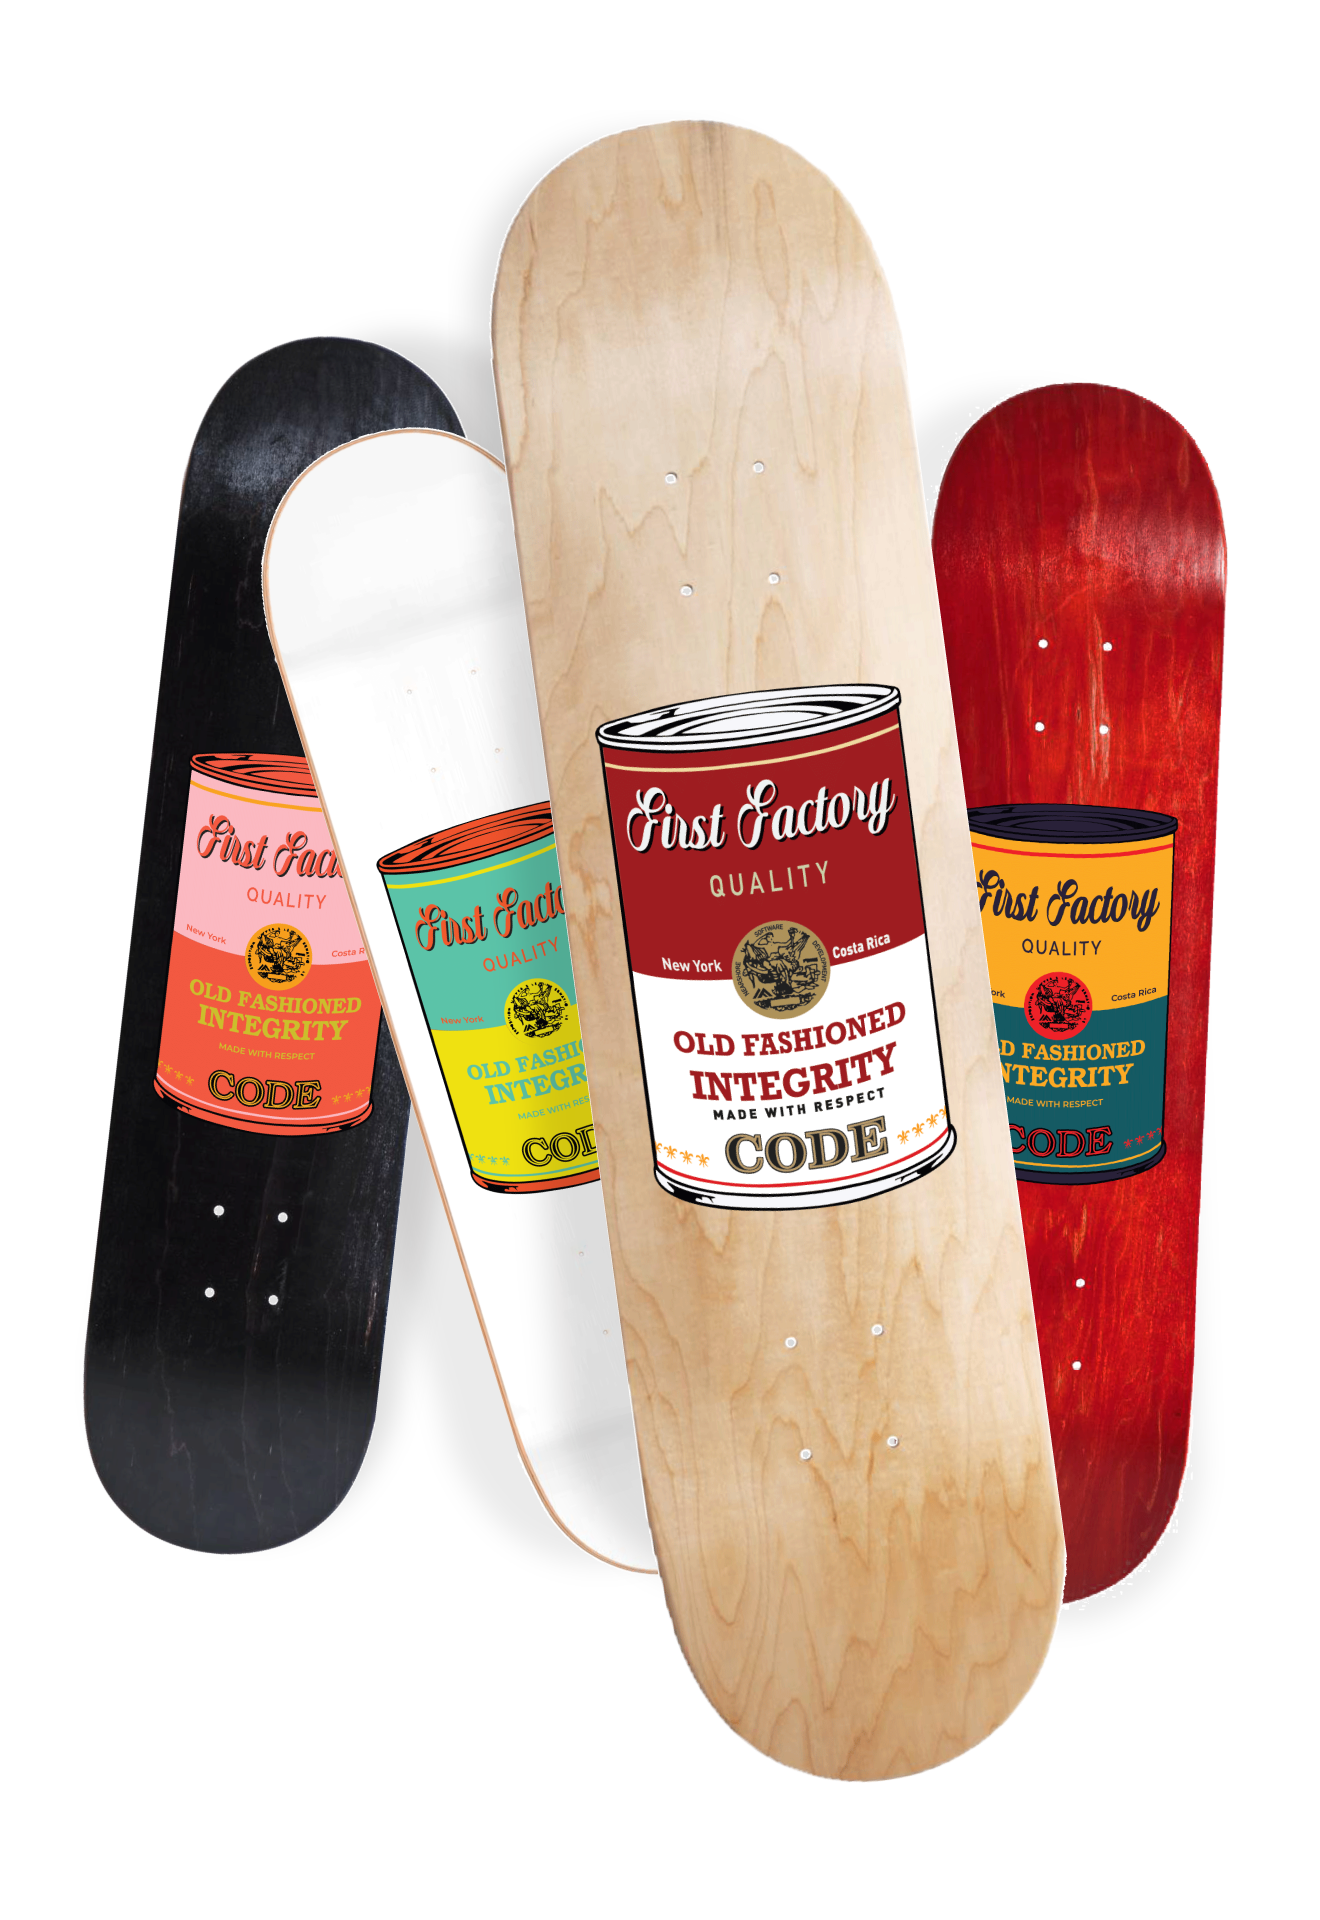 Four different skateboard decks branded with First Factory's soup can, inspired by Andy Warhol's art